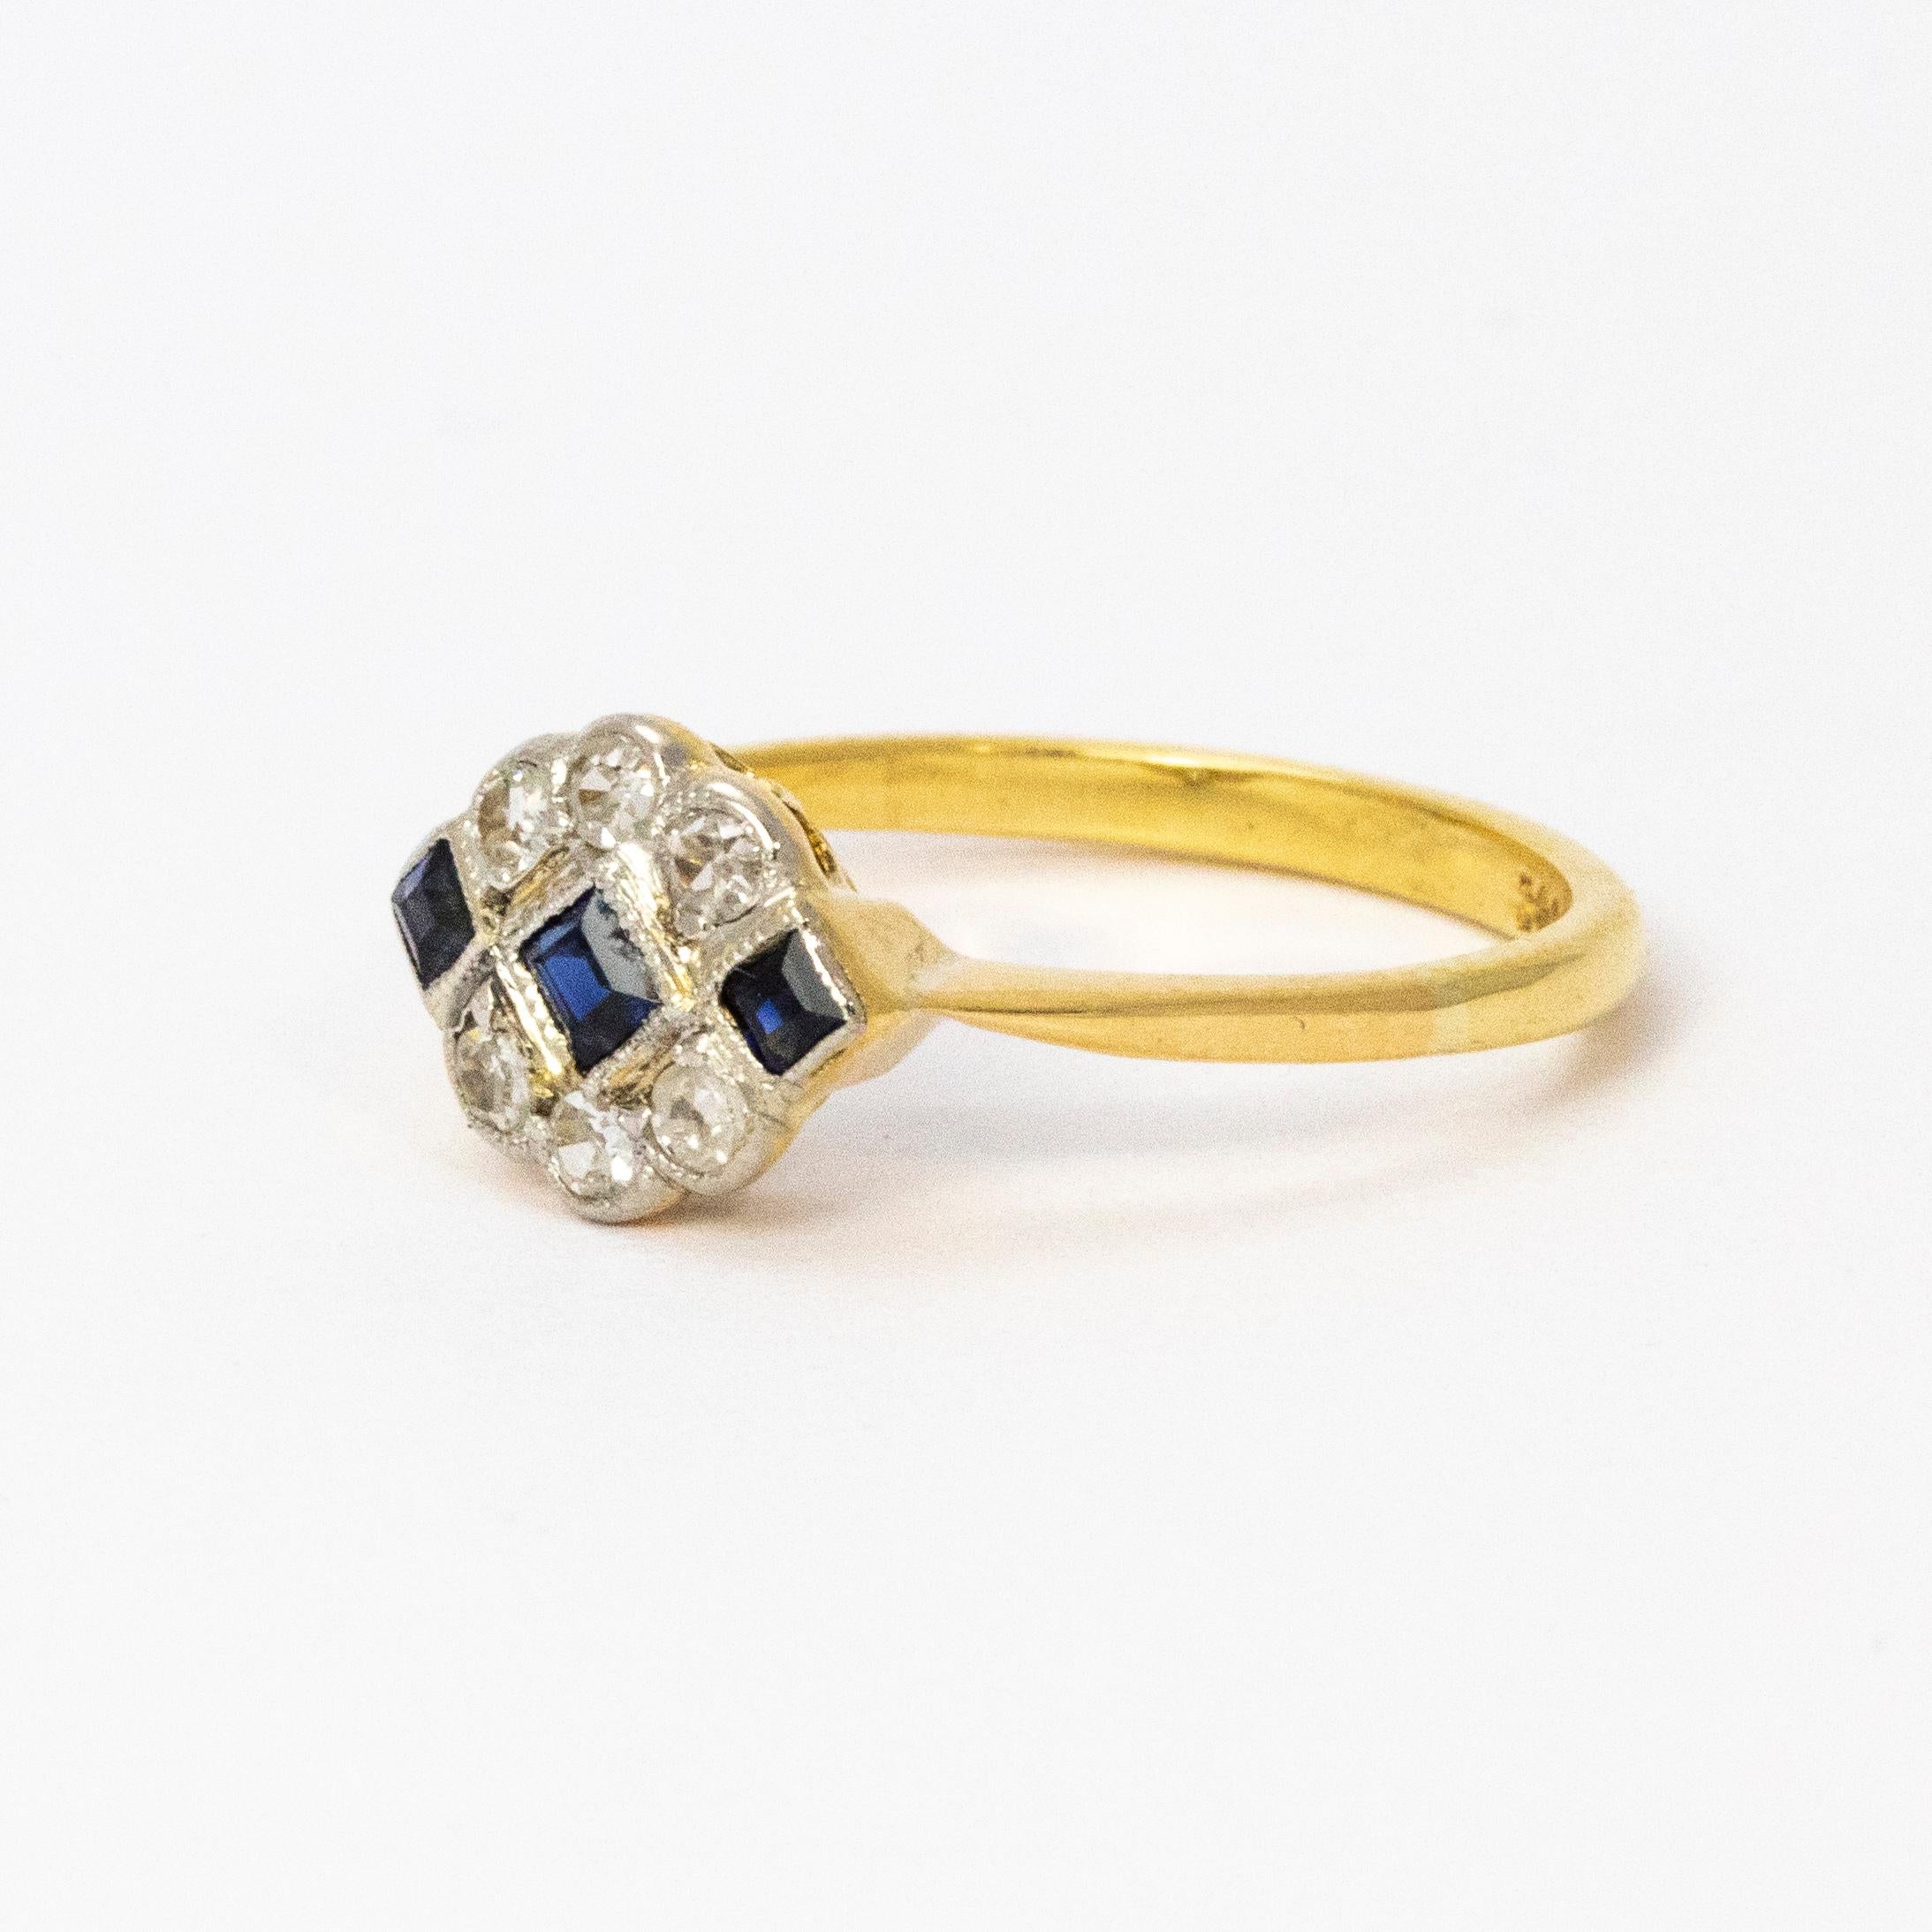 A stunning 1920s Art Deco ring. Centrally set with three brilliant blue square cut sapphires arranged horizontally across the face. Above and below sit curves of six wonderful white diamonds. Modelled in 18 karat yellow gold.

Ring Size: UK K 3/4 or